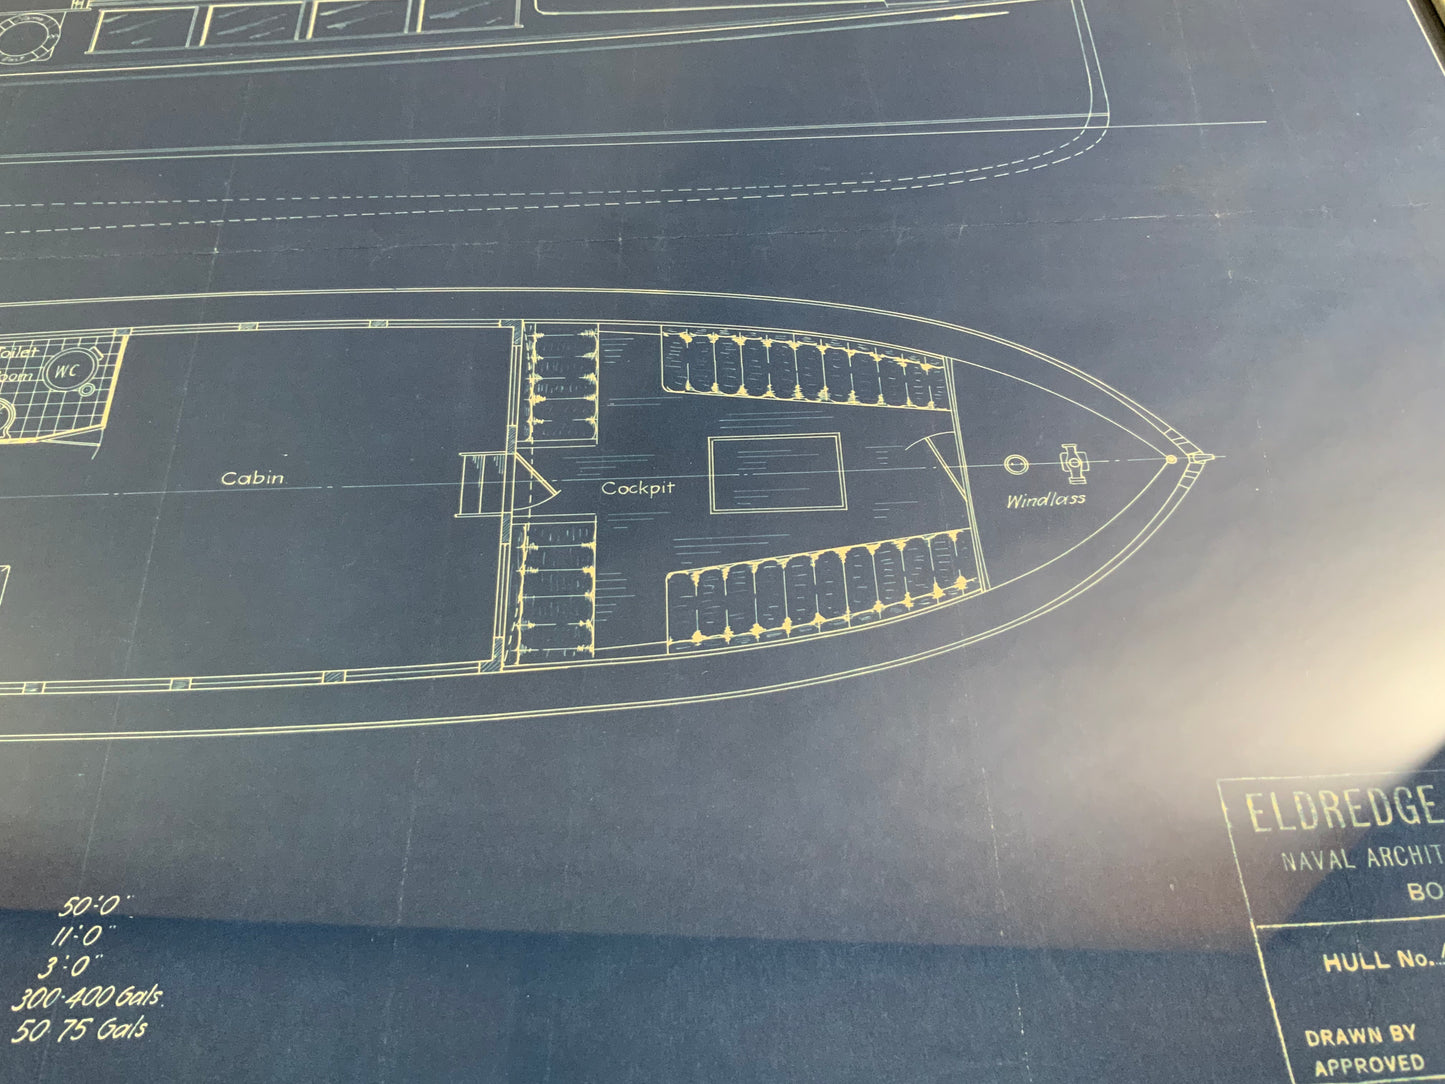 Yacht Blueprint of a Fifty Foot Yacht by Howard Chapelle - Lannan Gallery